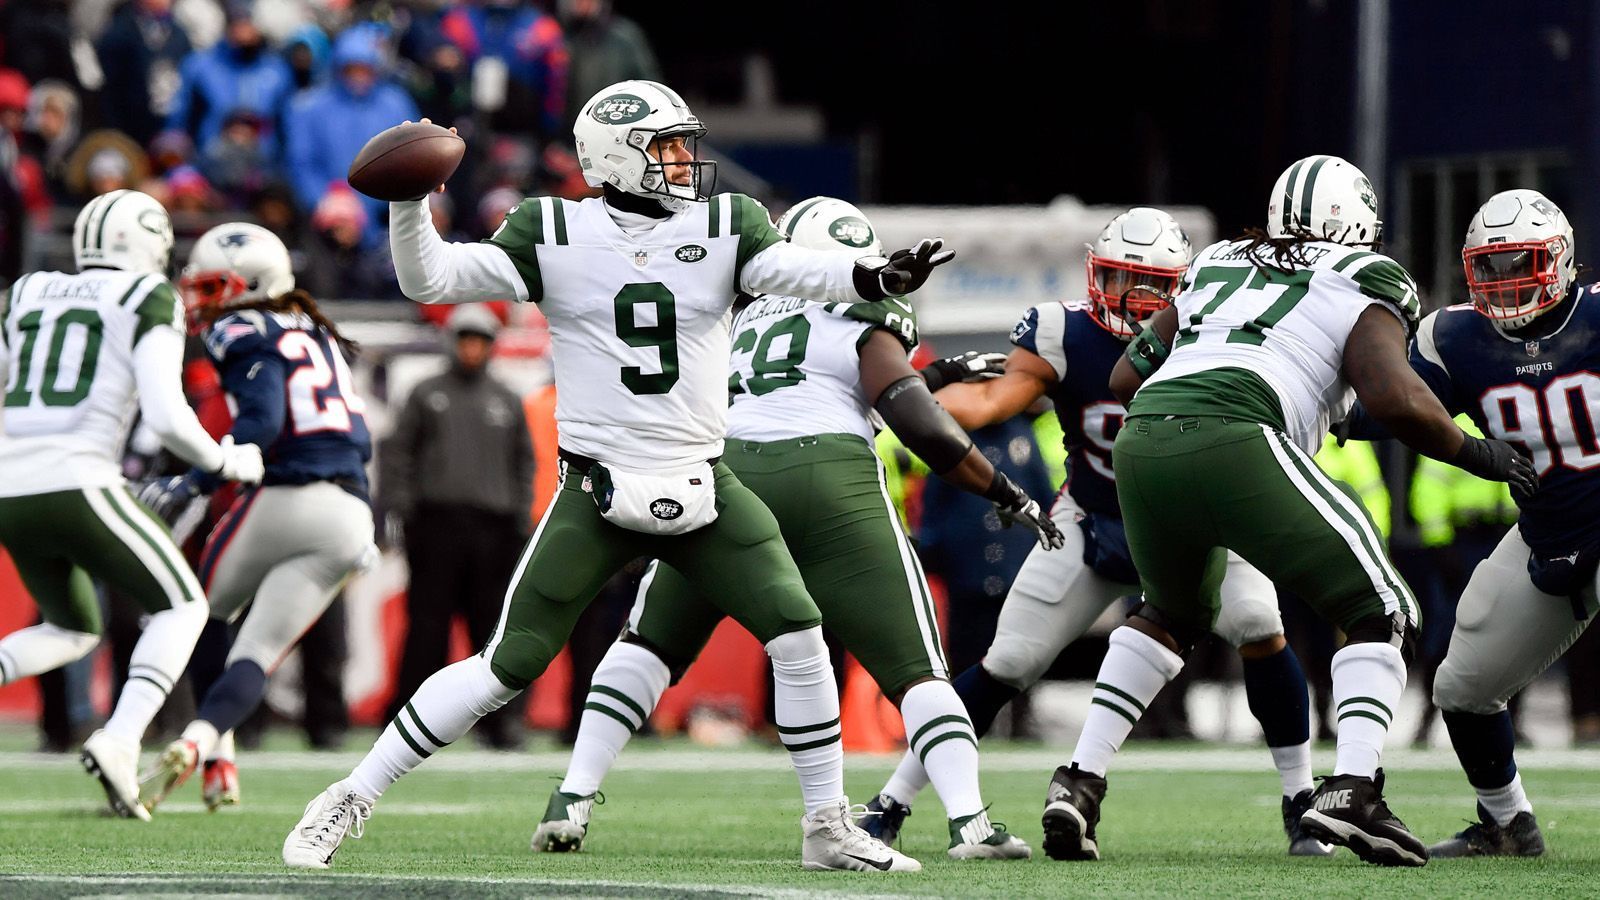 
                <strong>Bryce Petty</strong><br>
                &#x2022; Im Team: 2015-2017<br>&#x2022; Record: 1-6<br>
              